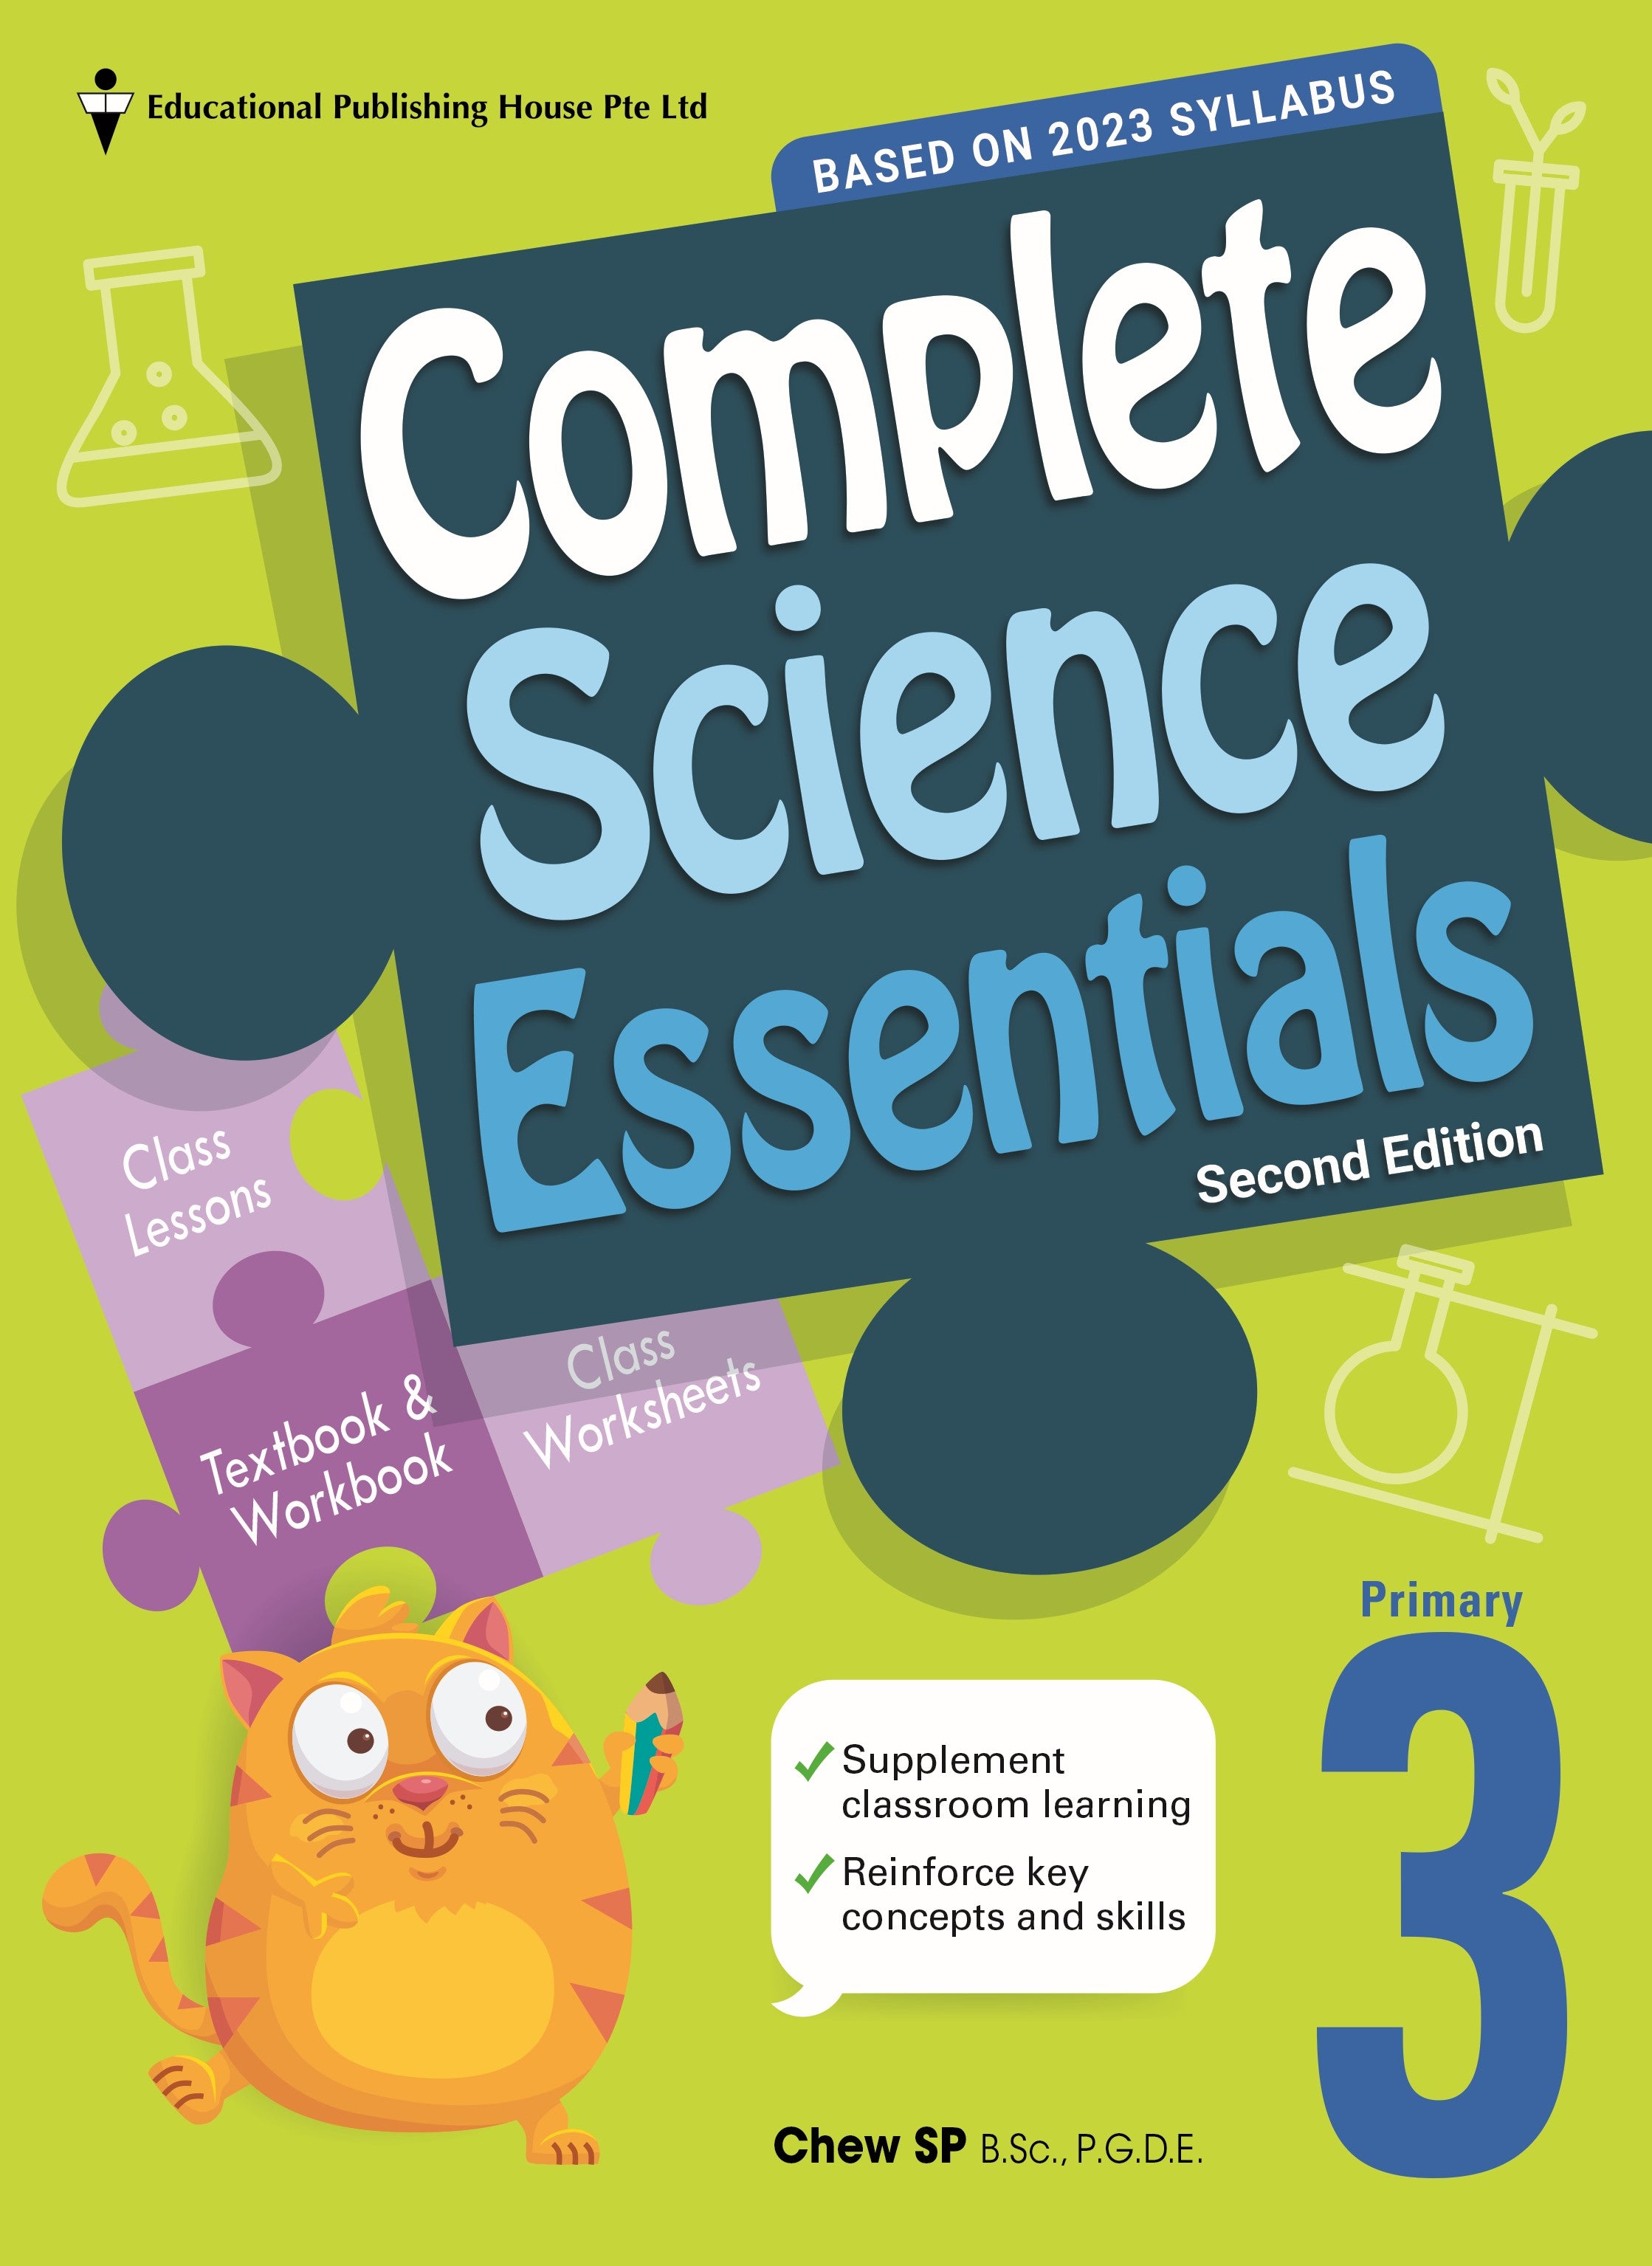 Primary 3 Complete Science Essentials - _MS, EDUCATIONAL PUBLISHING HOUSE, PRIMARY 3, SCIENCE